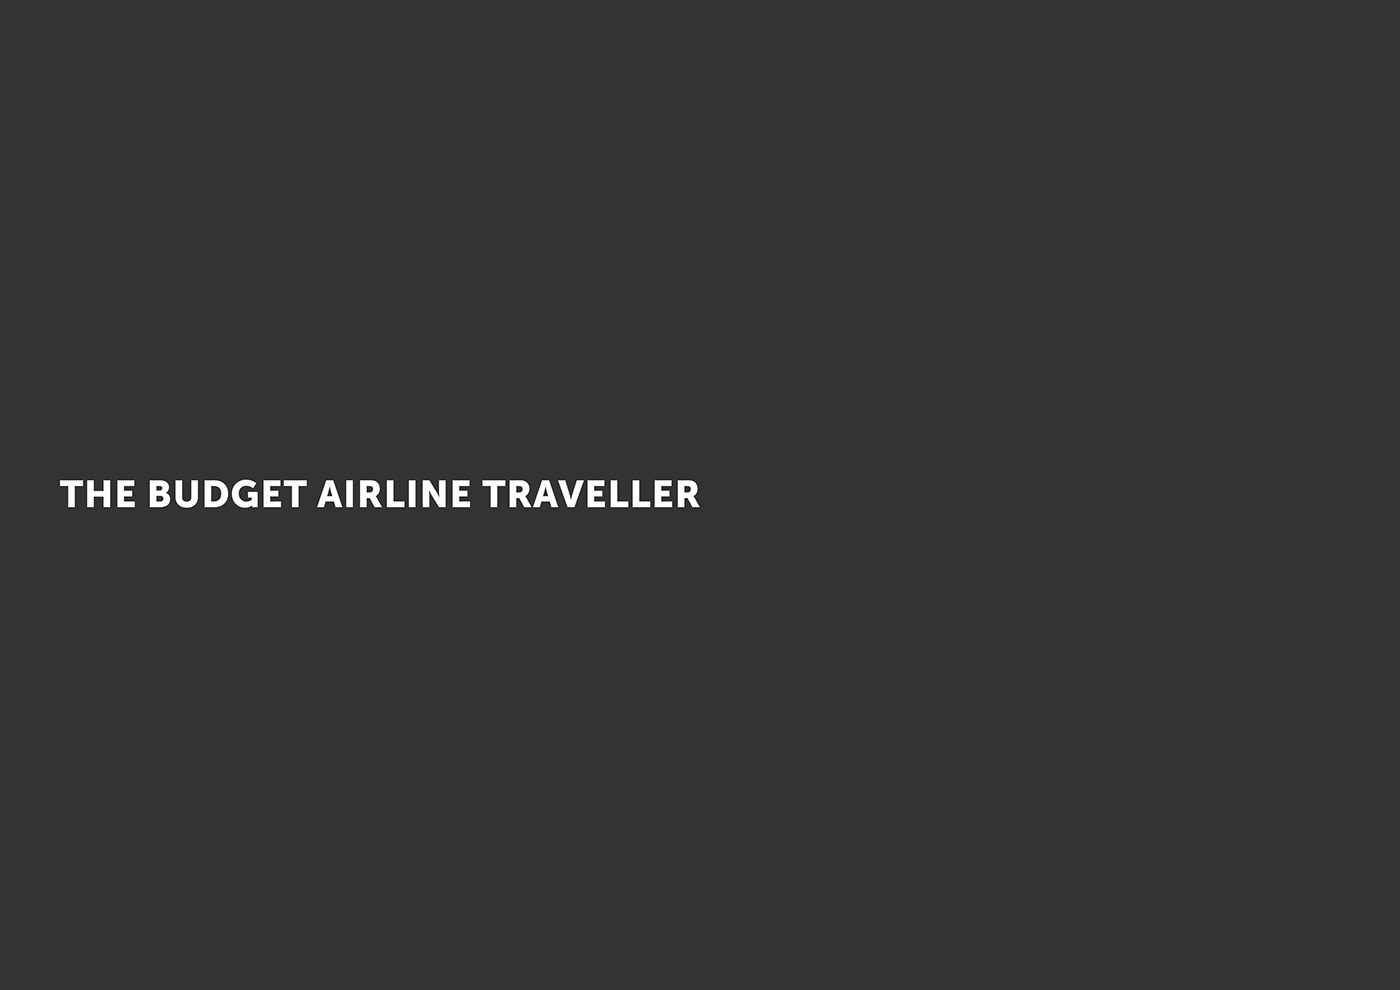 Travel Food Services airline Story telling system & structure ILLUSTRATION 